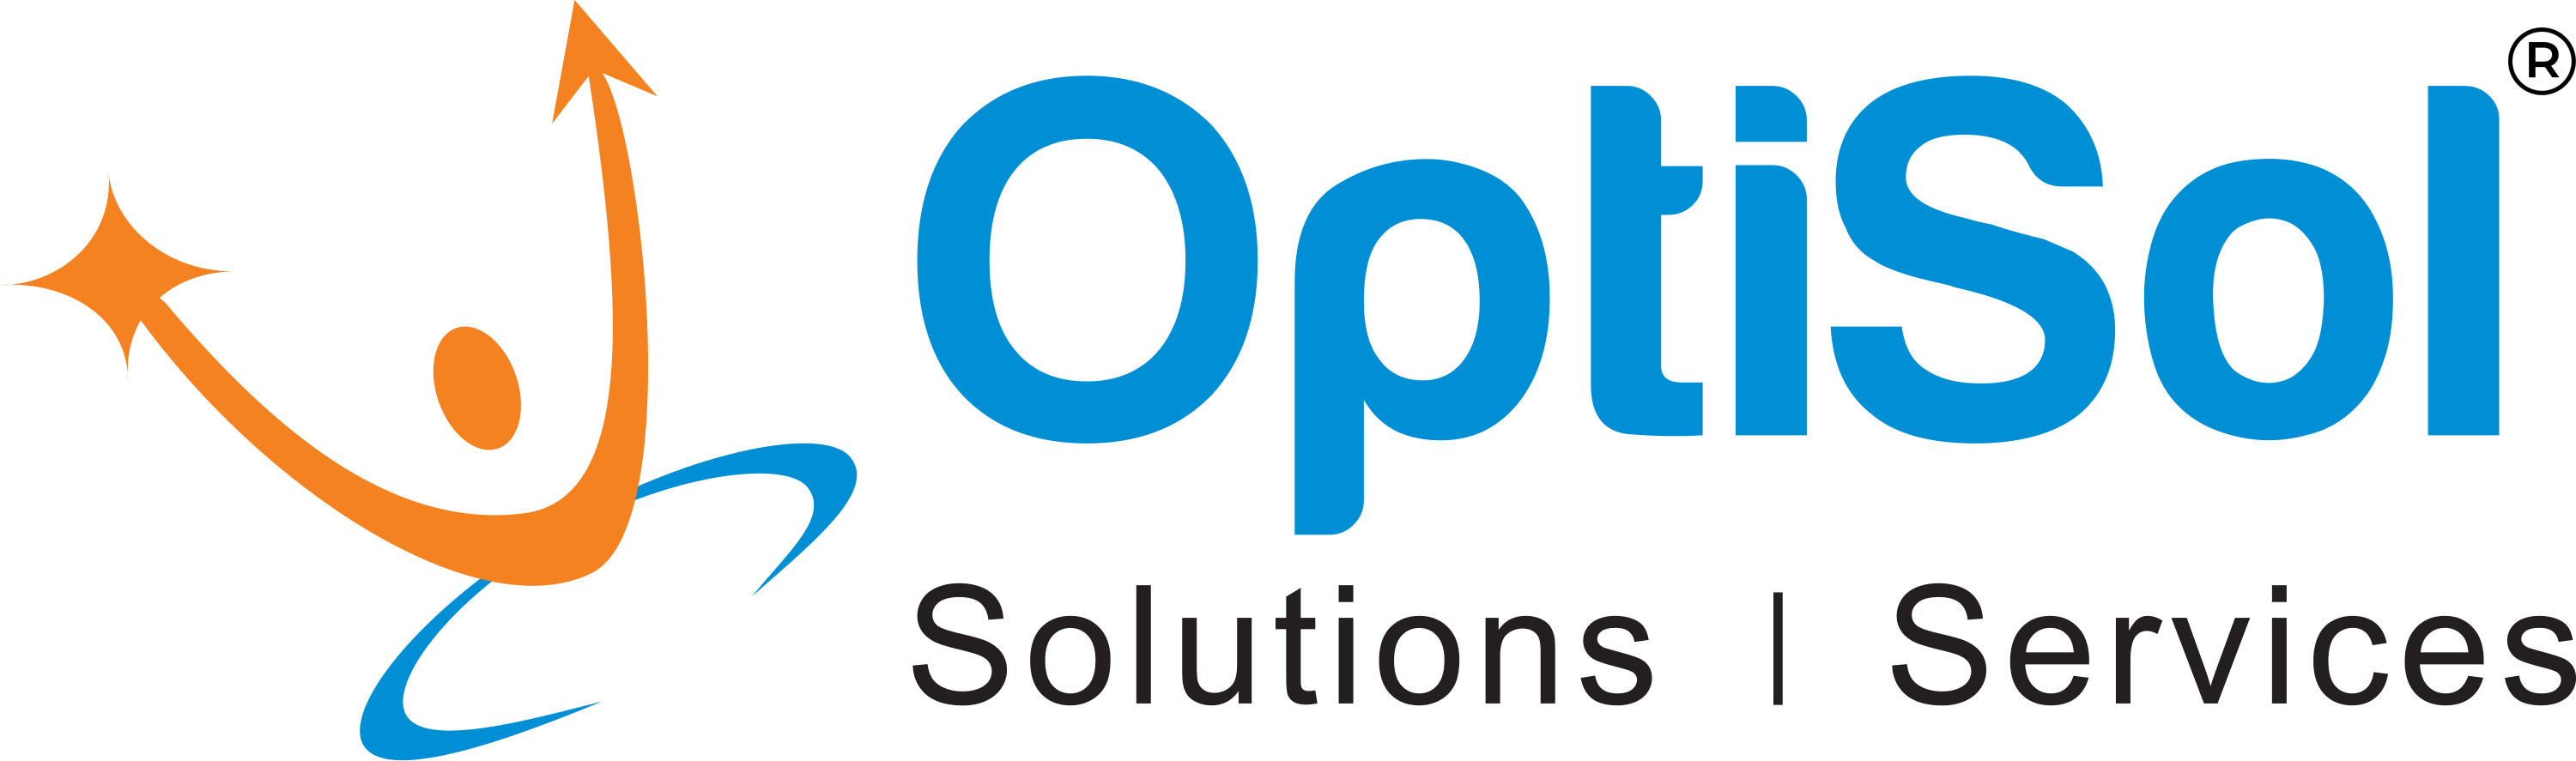 OptiSol business Solutions